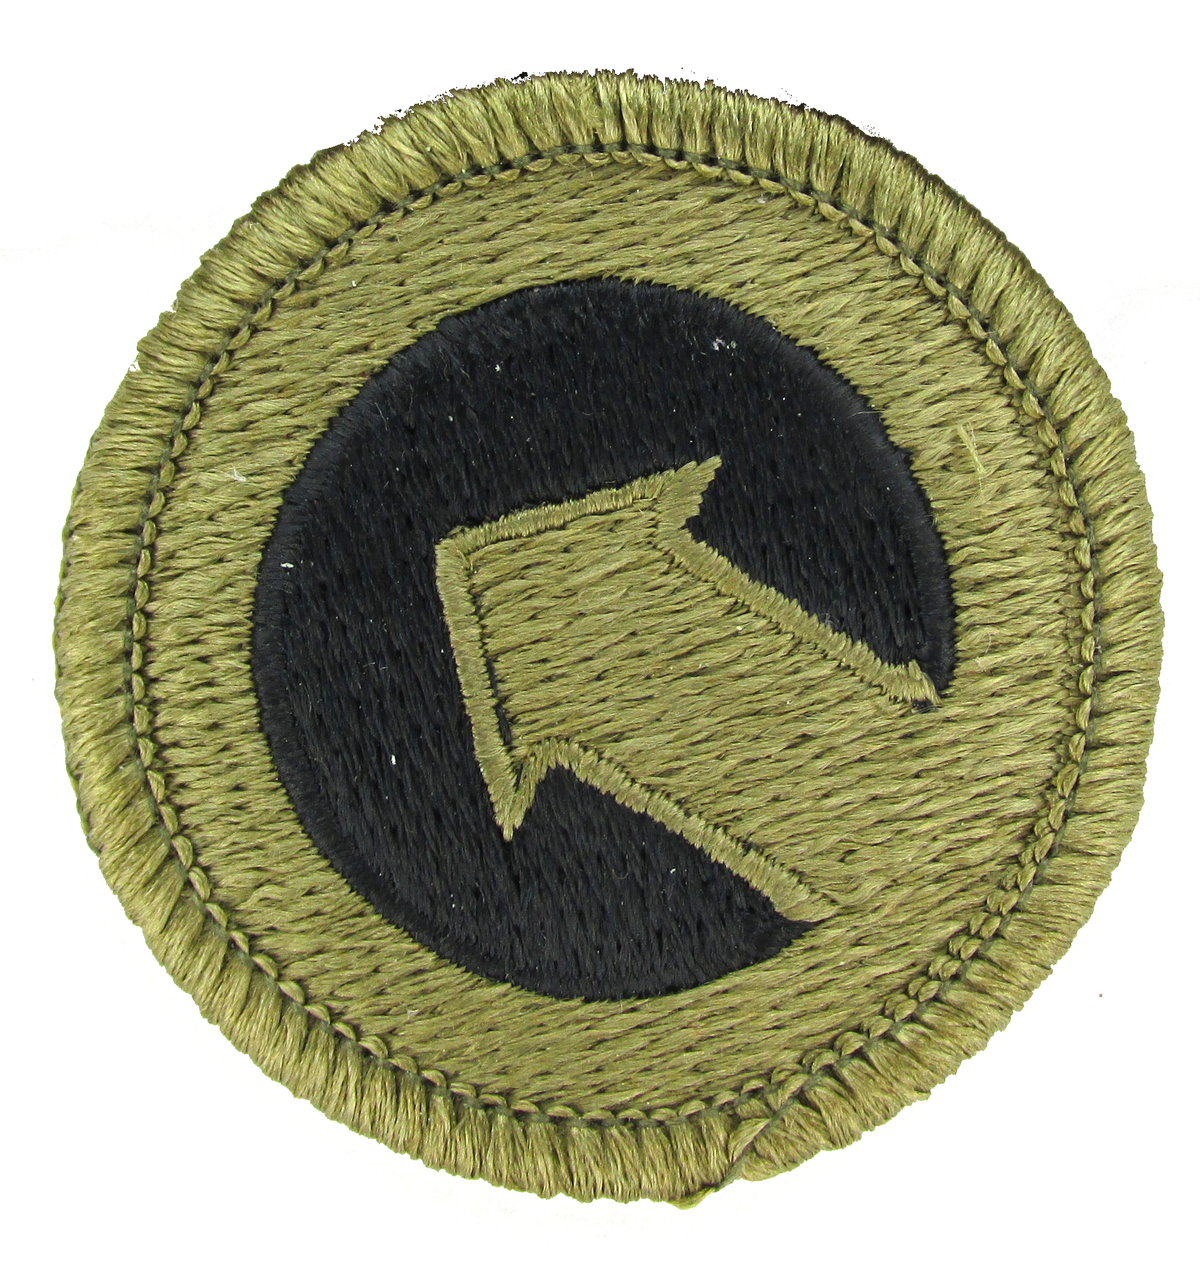 1st Sustainment Command OCP Patch